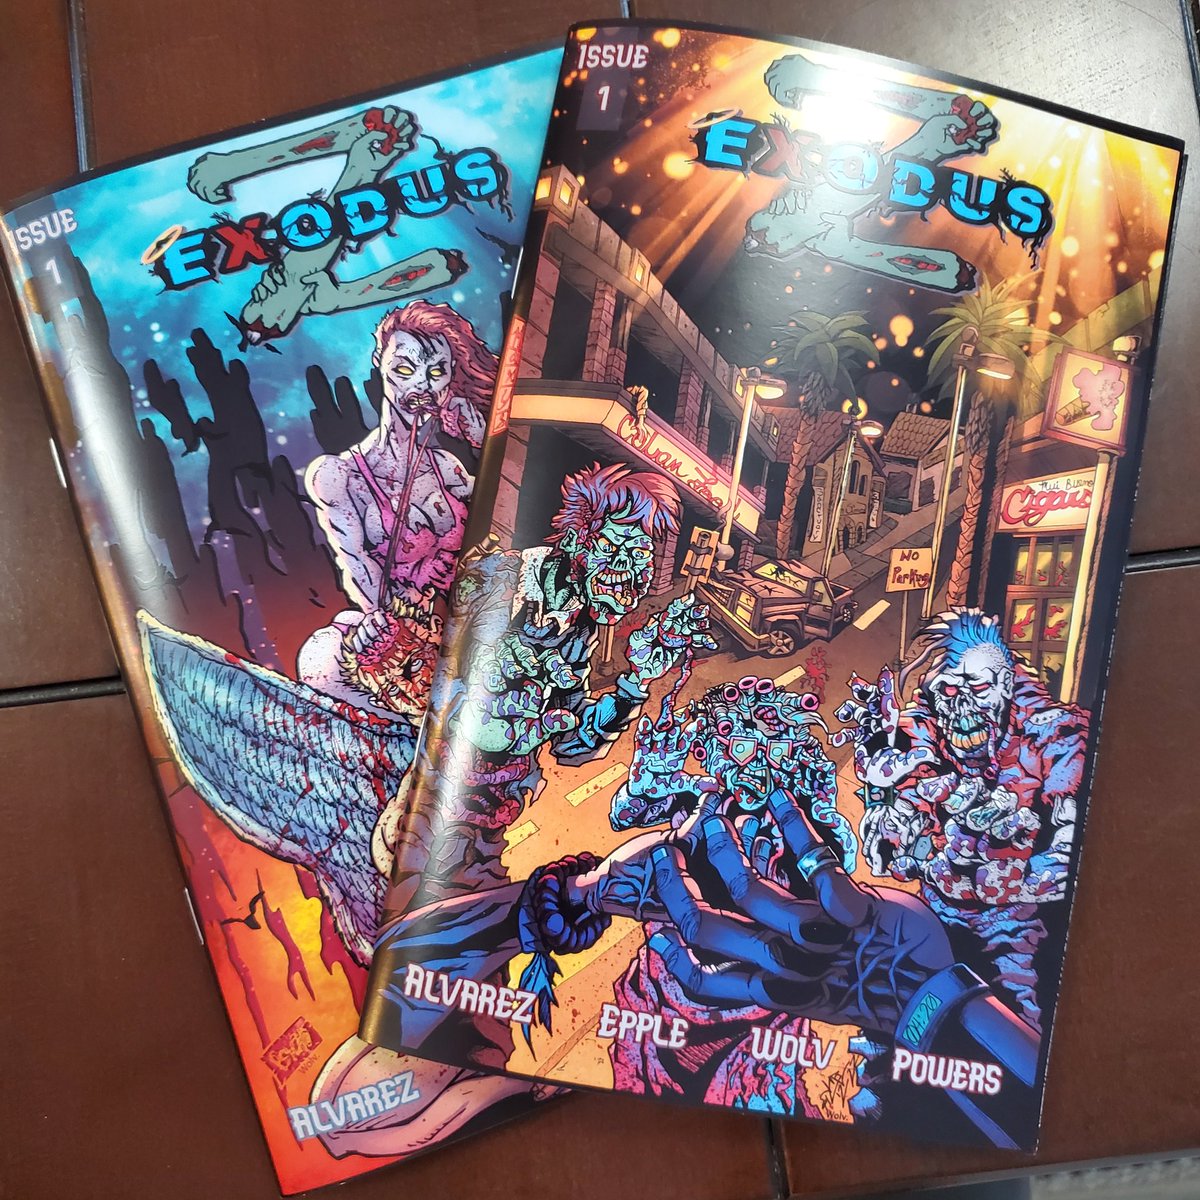 Issue One Proof Are In!!!! Everything looked great and have approved for final printing with @ComixWellSpring

#ExodusZ #zombie #zombies #heavenlyhorror #indiecomics #indiecomicbook #indiecomic #comicbooks #comics #comic #comix #weloveindiecomics #horror #horrorcomics